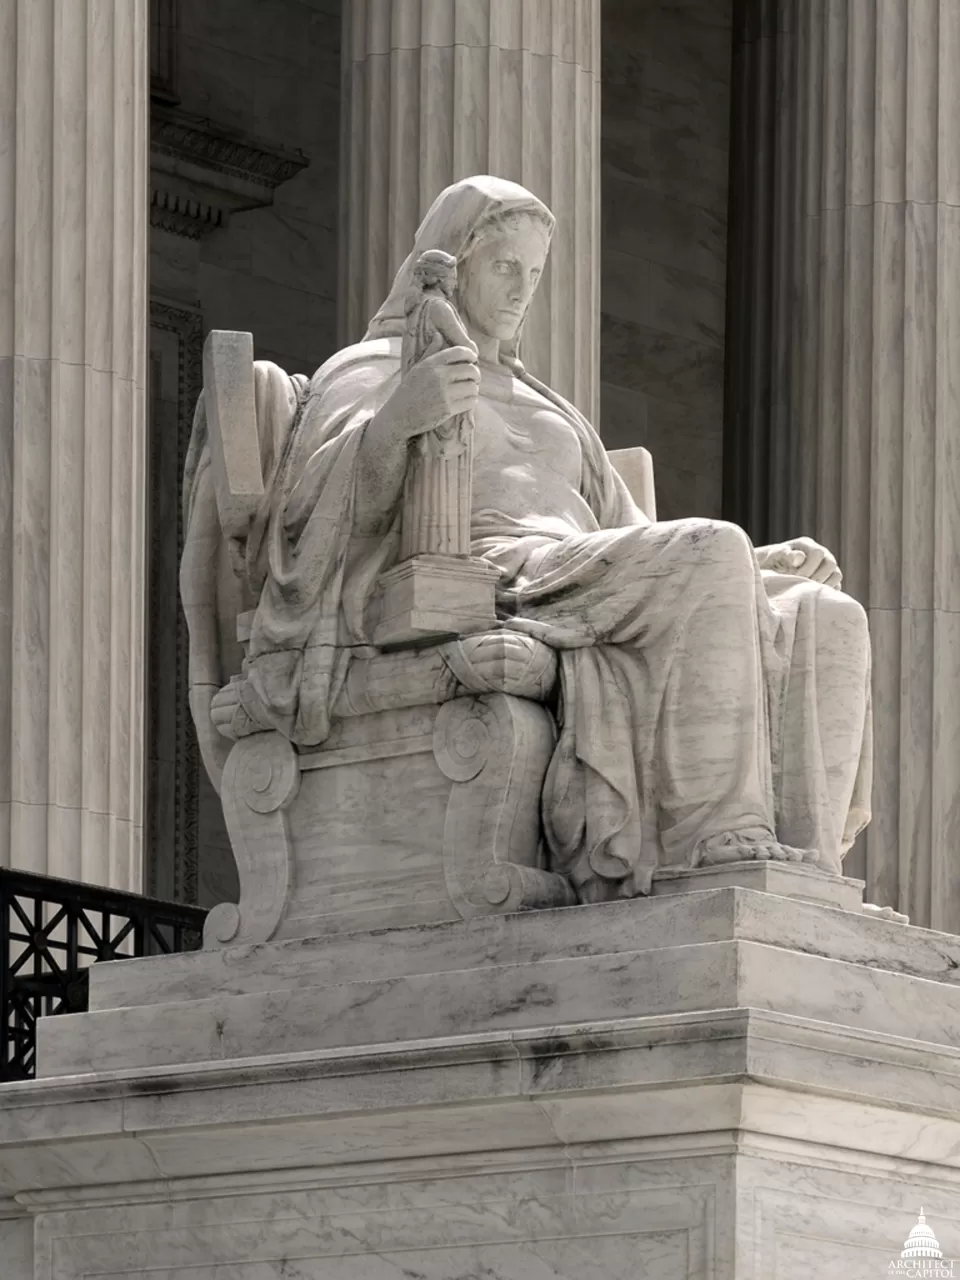 Statue of Contemplation of Justice by James Earle Fraser on the U.S. Supreme Court Building's main steps. Architect of the Capitol.